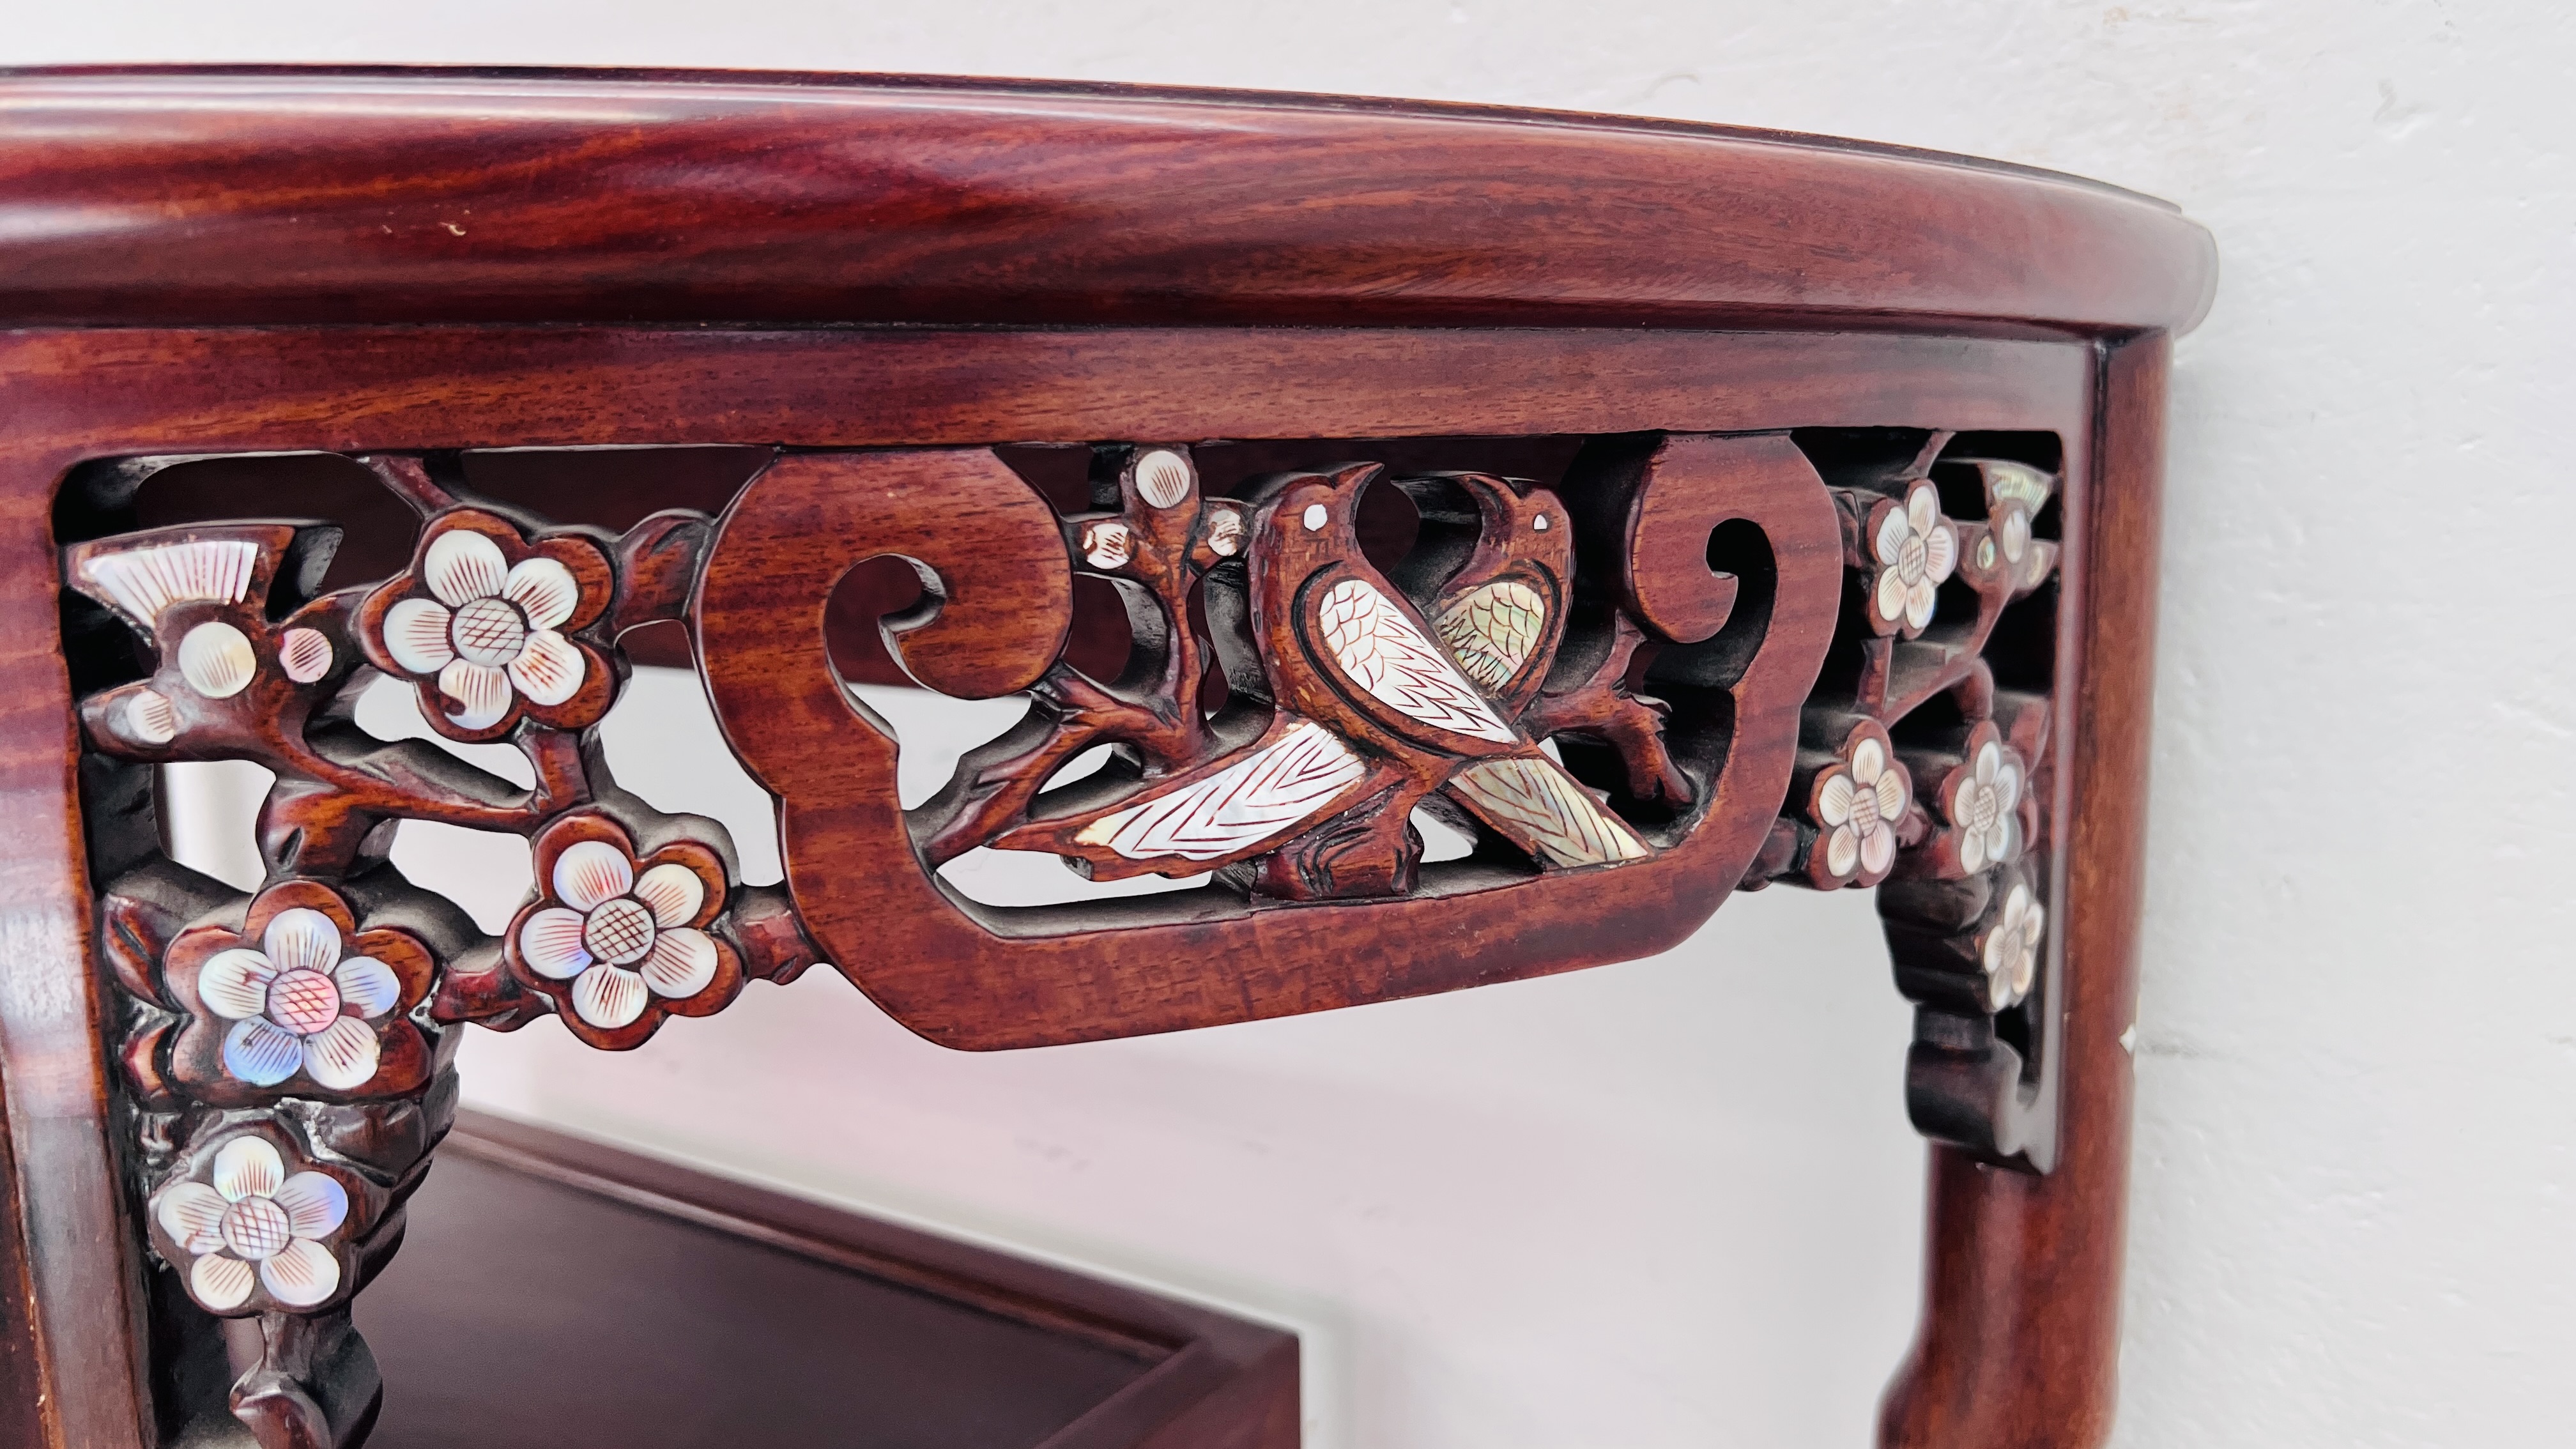 AN ORIENTAL HARDWOOD AND MOTHER OF PEARL INLAID SIDE TABLE WITH SHELF BELOW. - Image 7 of 9